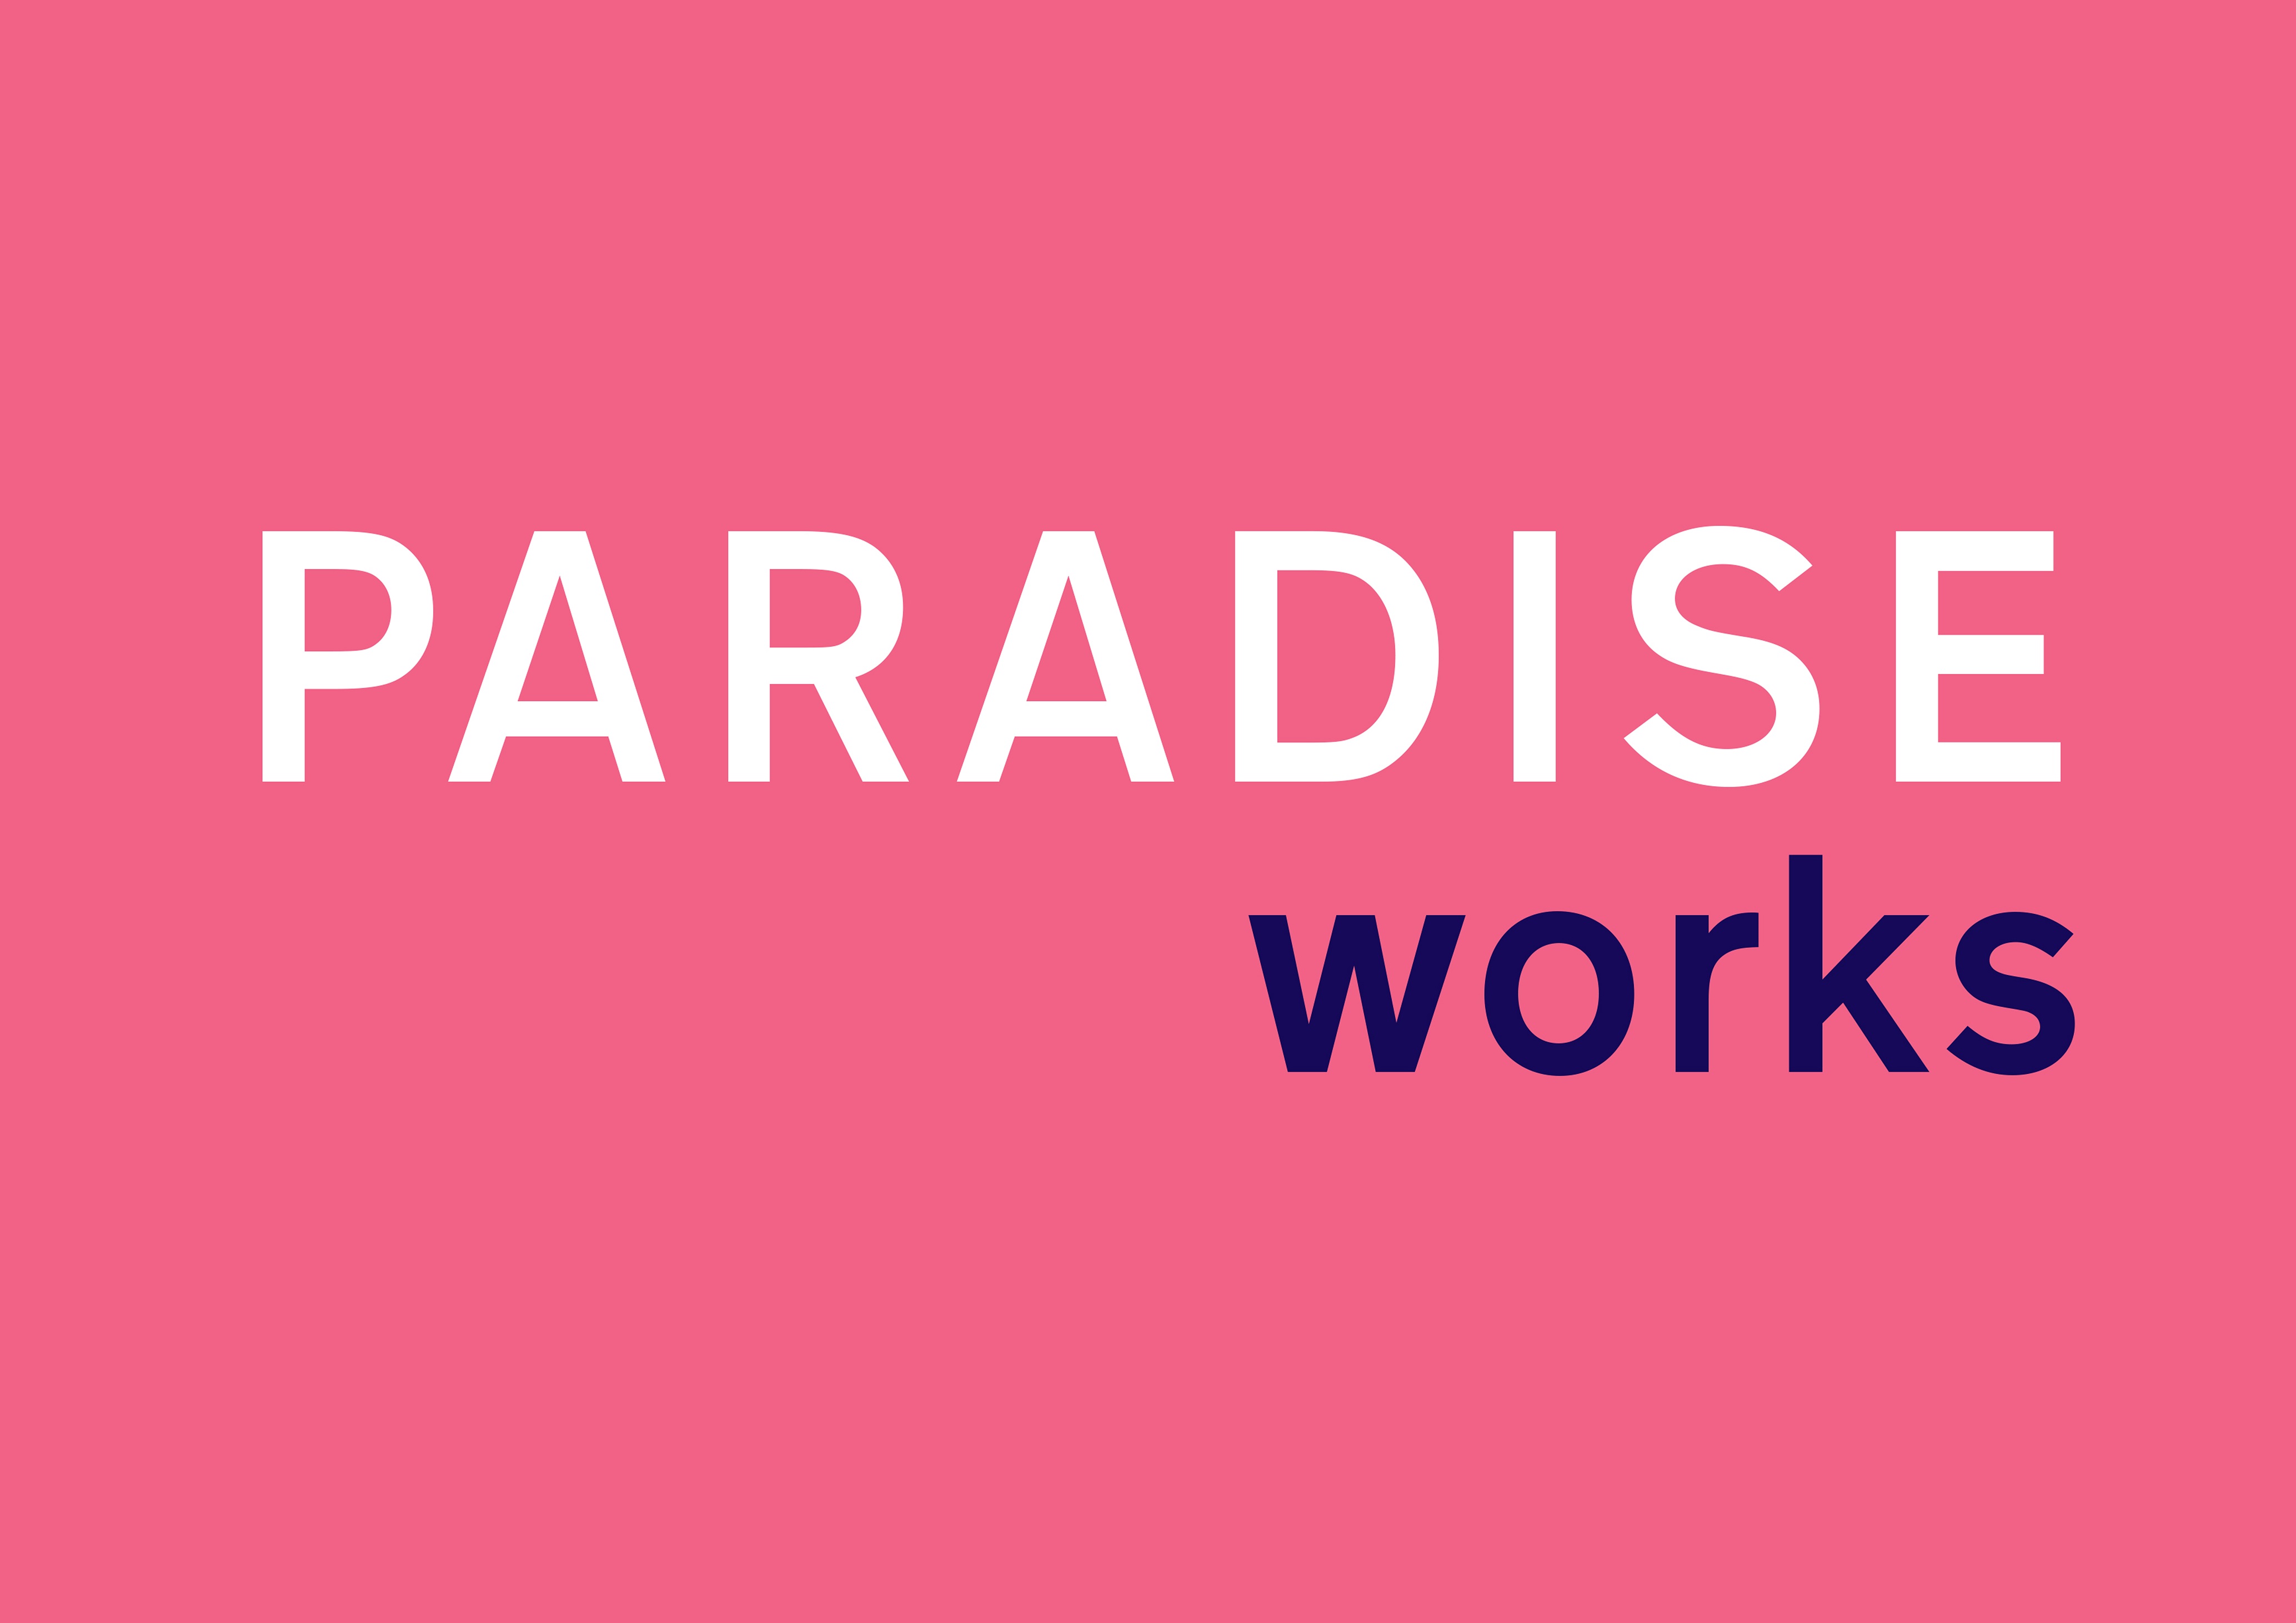 Logo for Paradise works. Pink background then word 'PARADISE' in white and works in 'blue'.